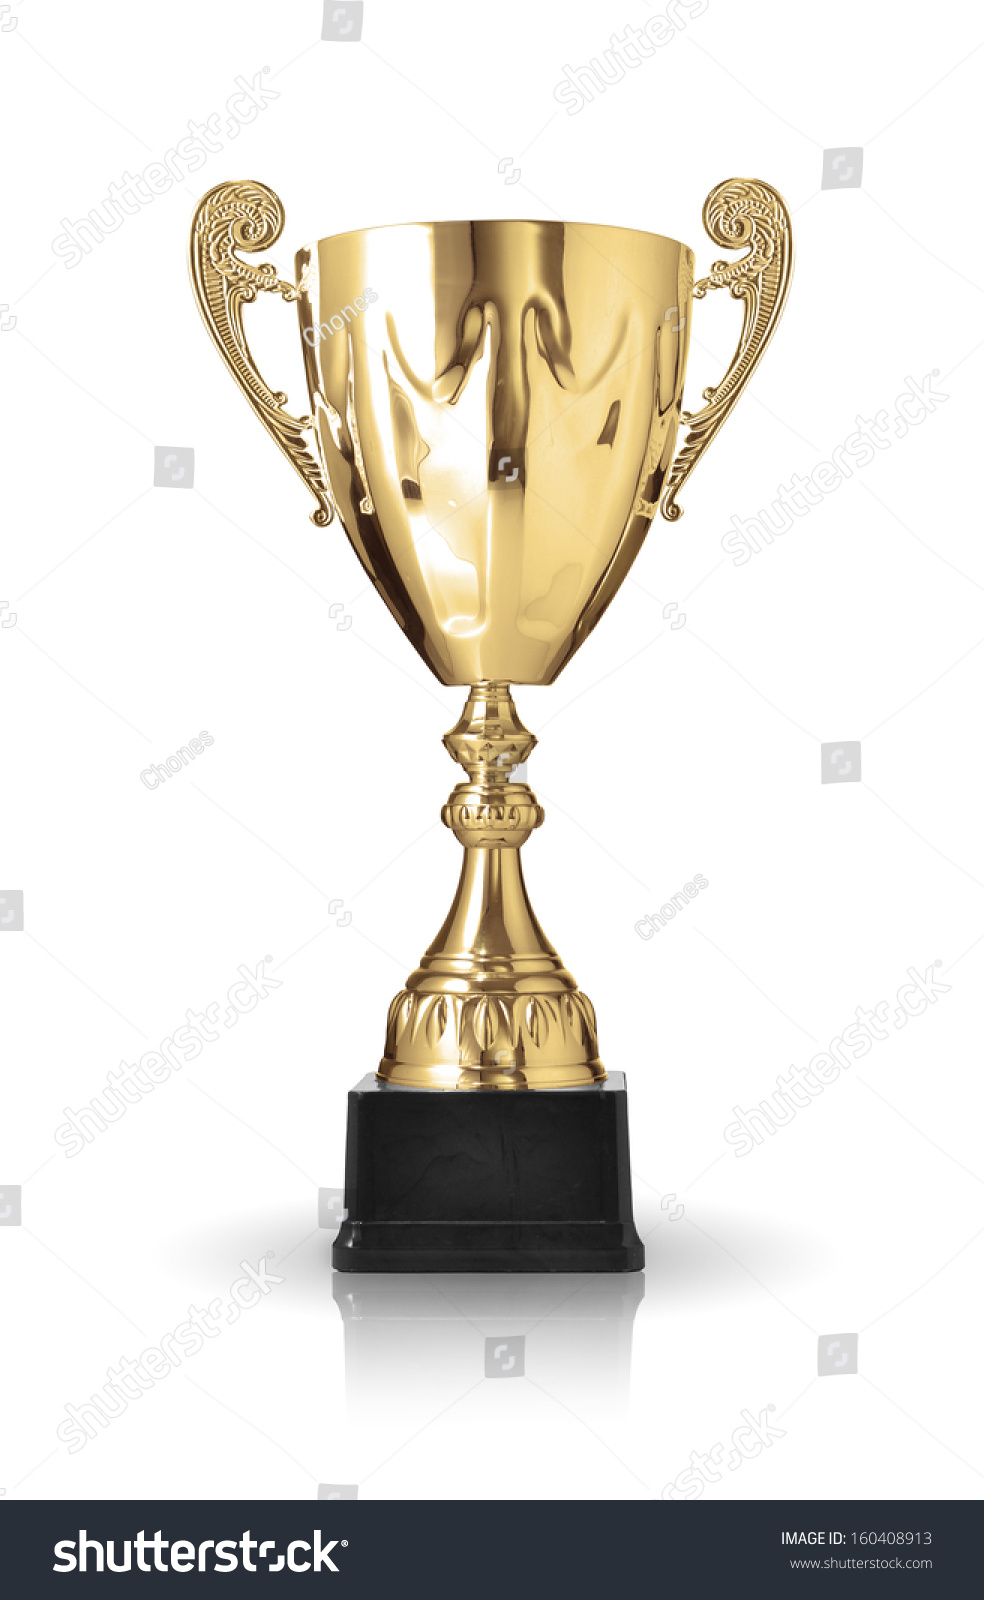 golden trophy isolated on white background #160408913